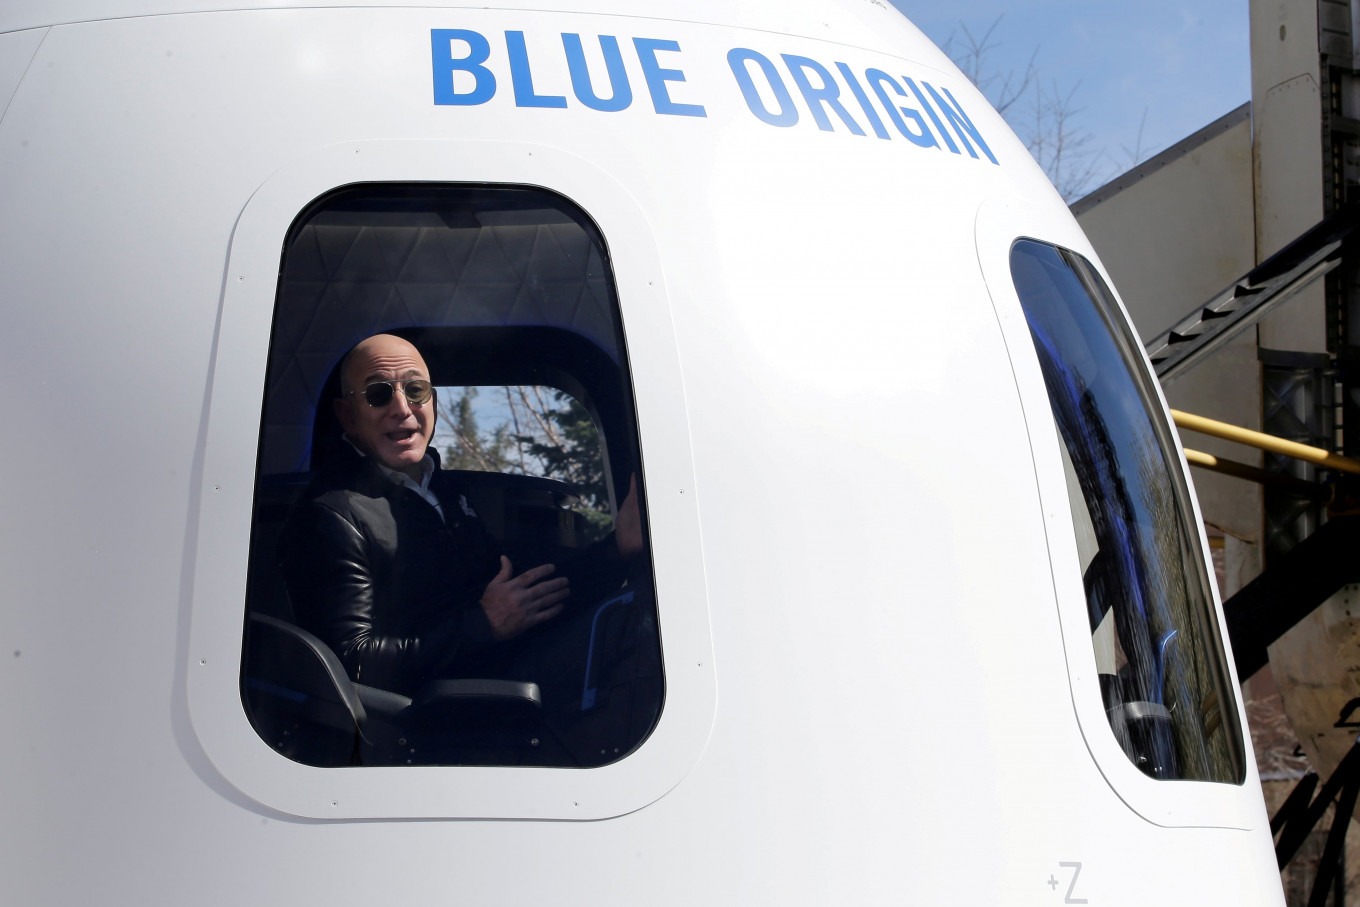 The Plot Sickens: Bid on a Trip to Space with Jeff Bezos (updated)